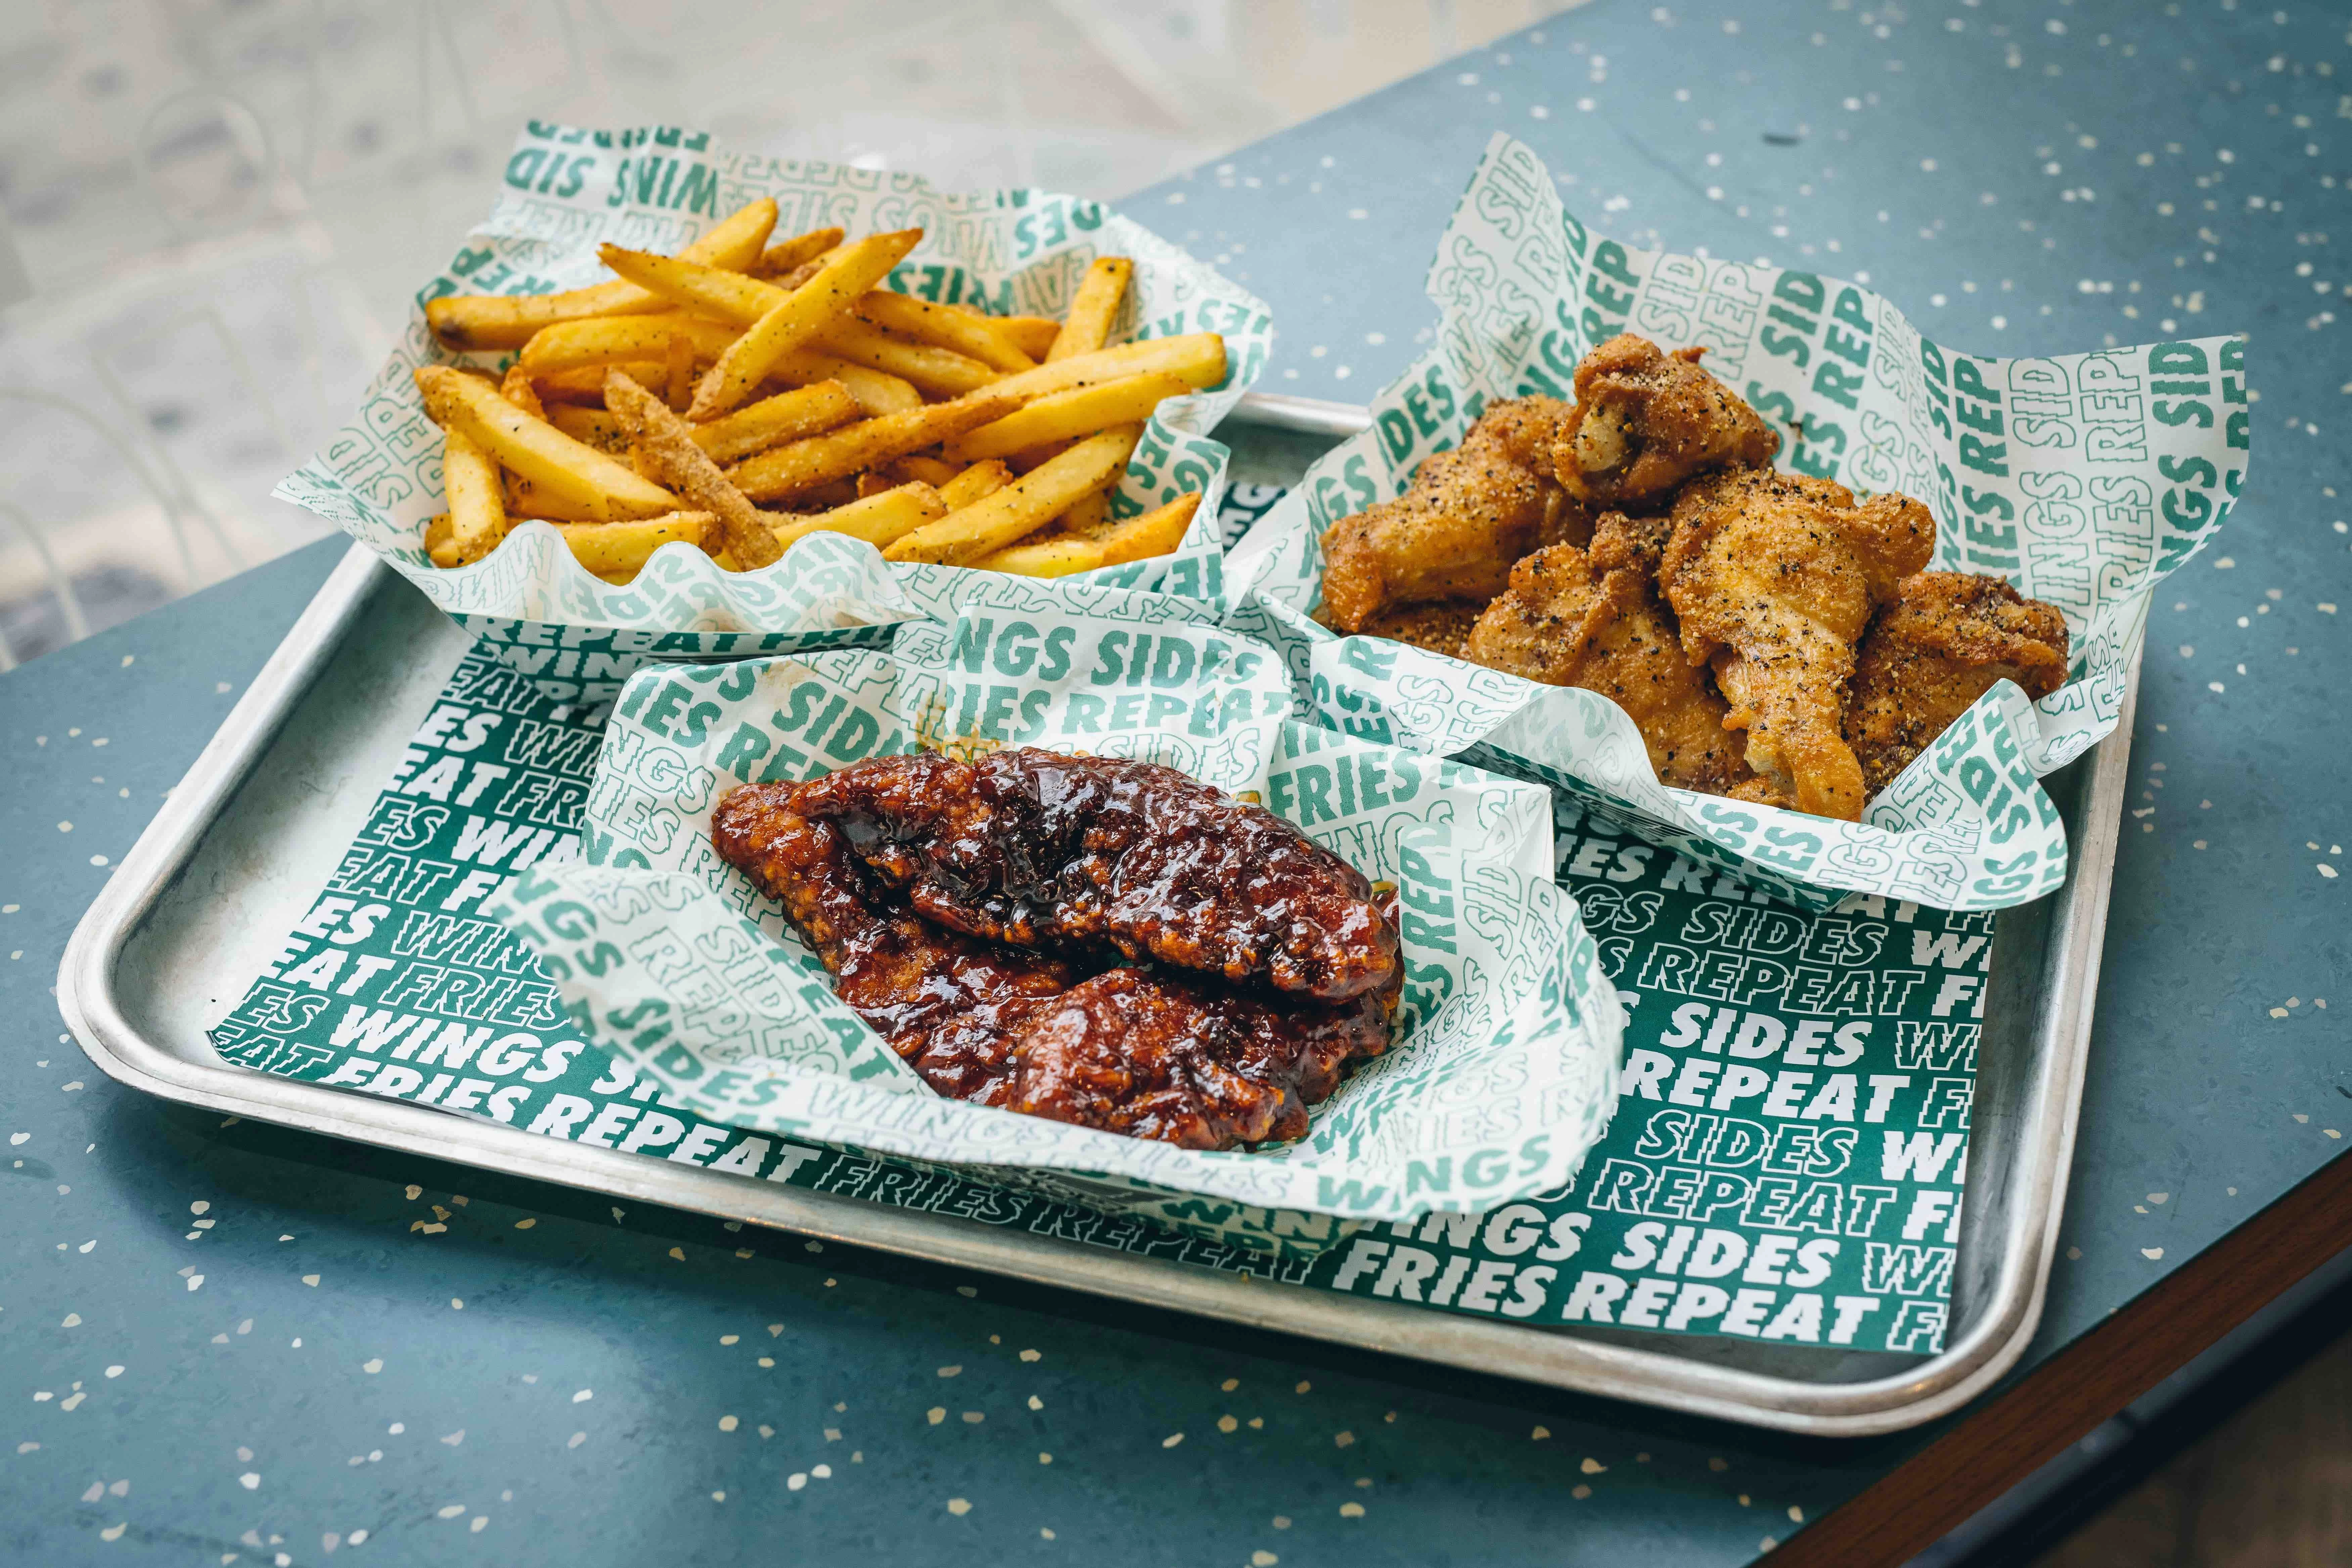 Food from wingstop 